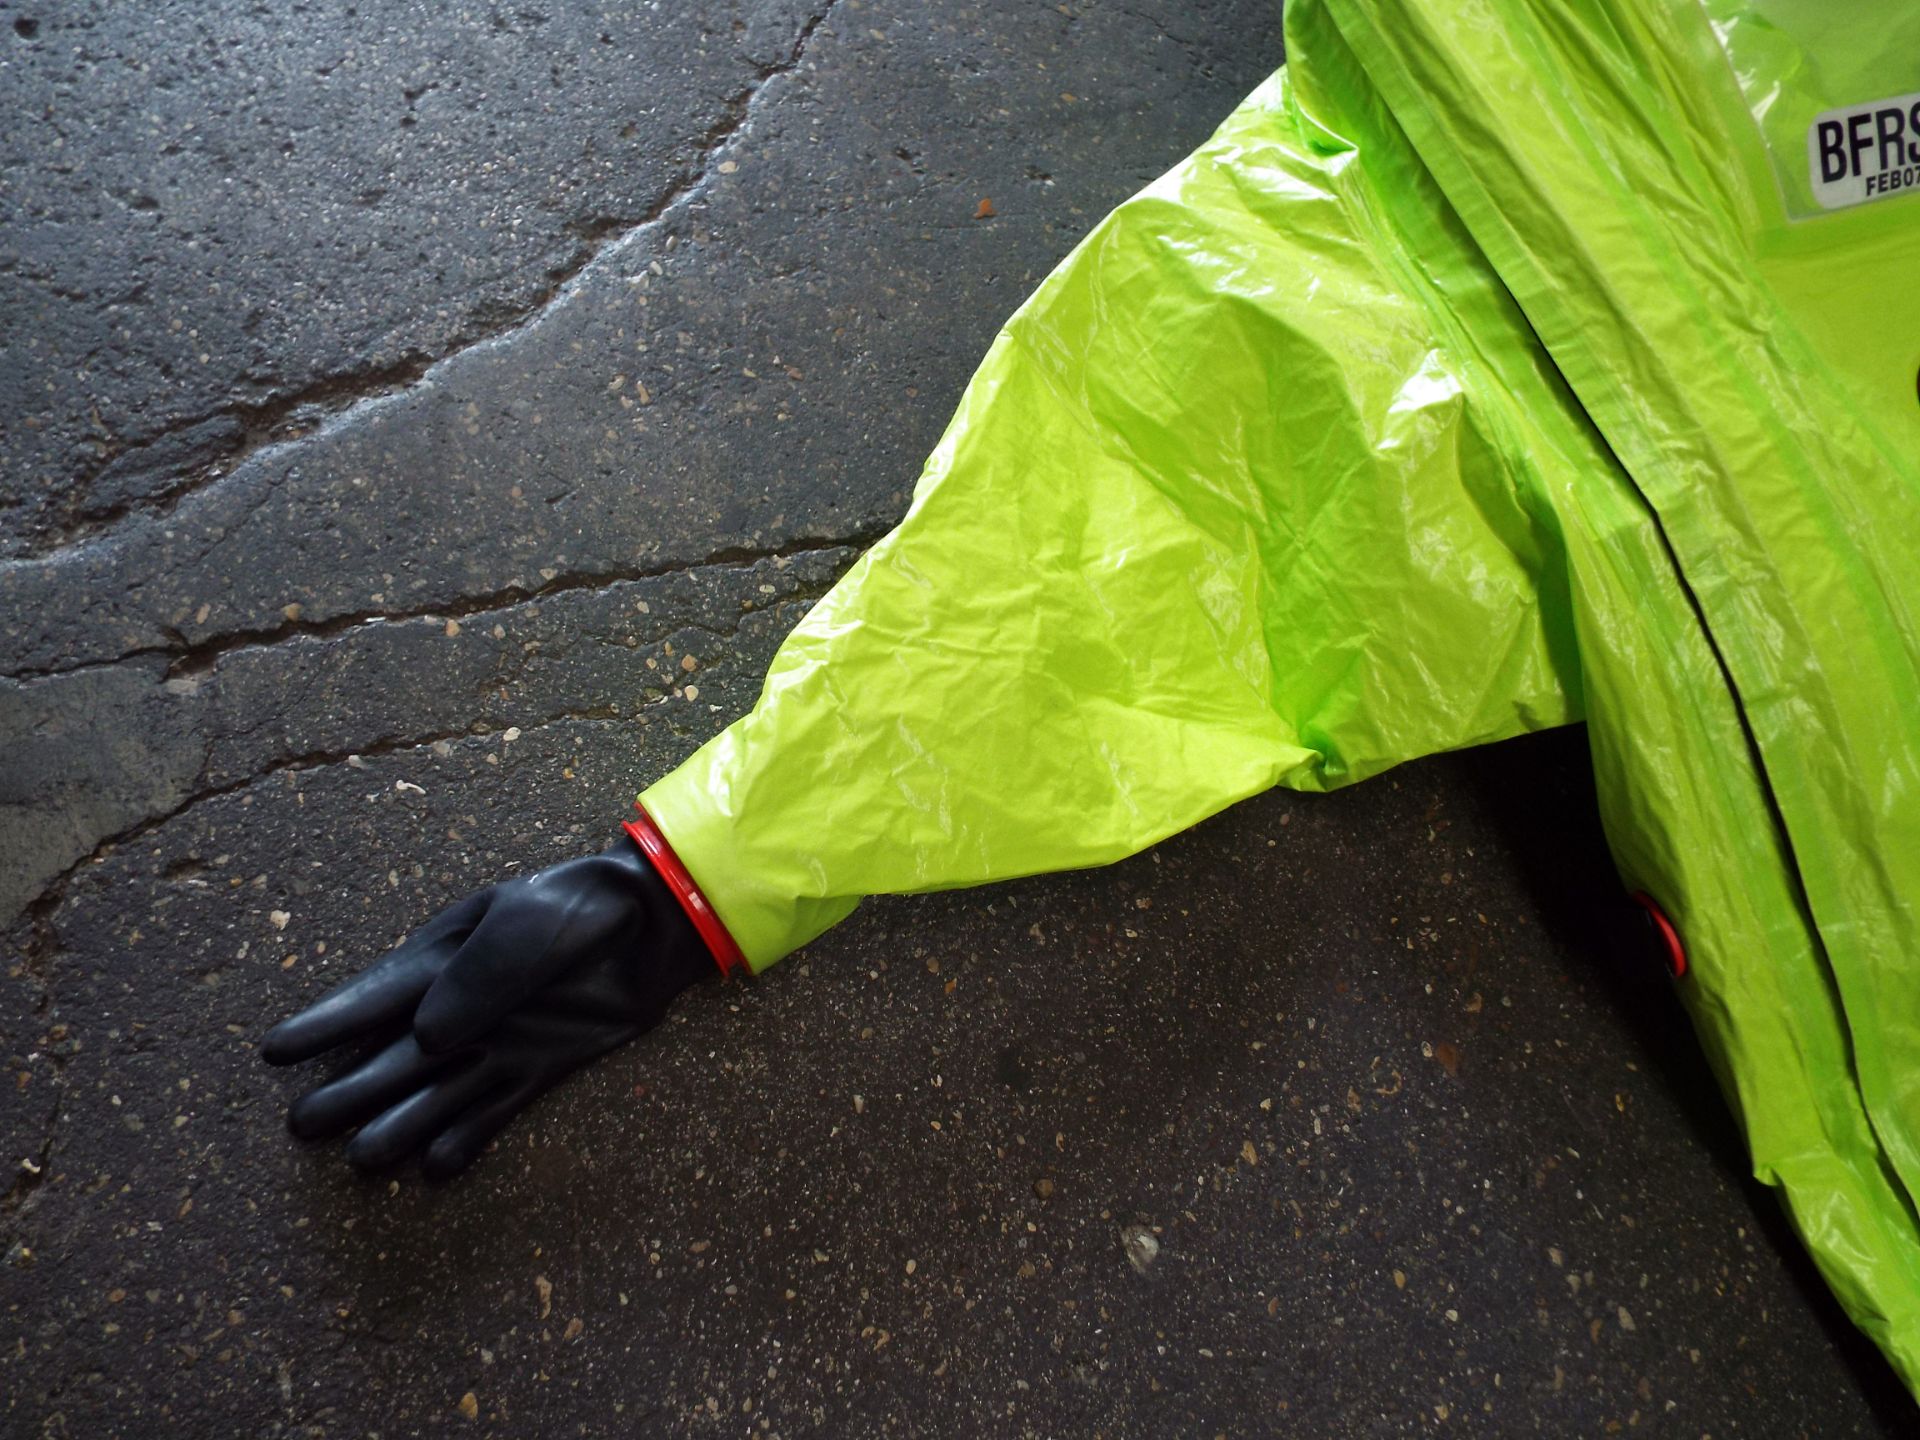 Respirex Tychem TK Gas-Tight Hazmat Suit Type 1A with Attached Boots and Gloves - Image 7 of 12